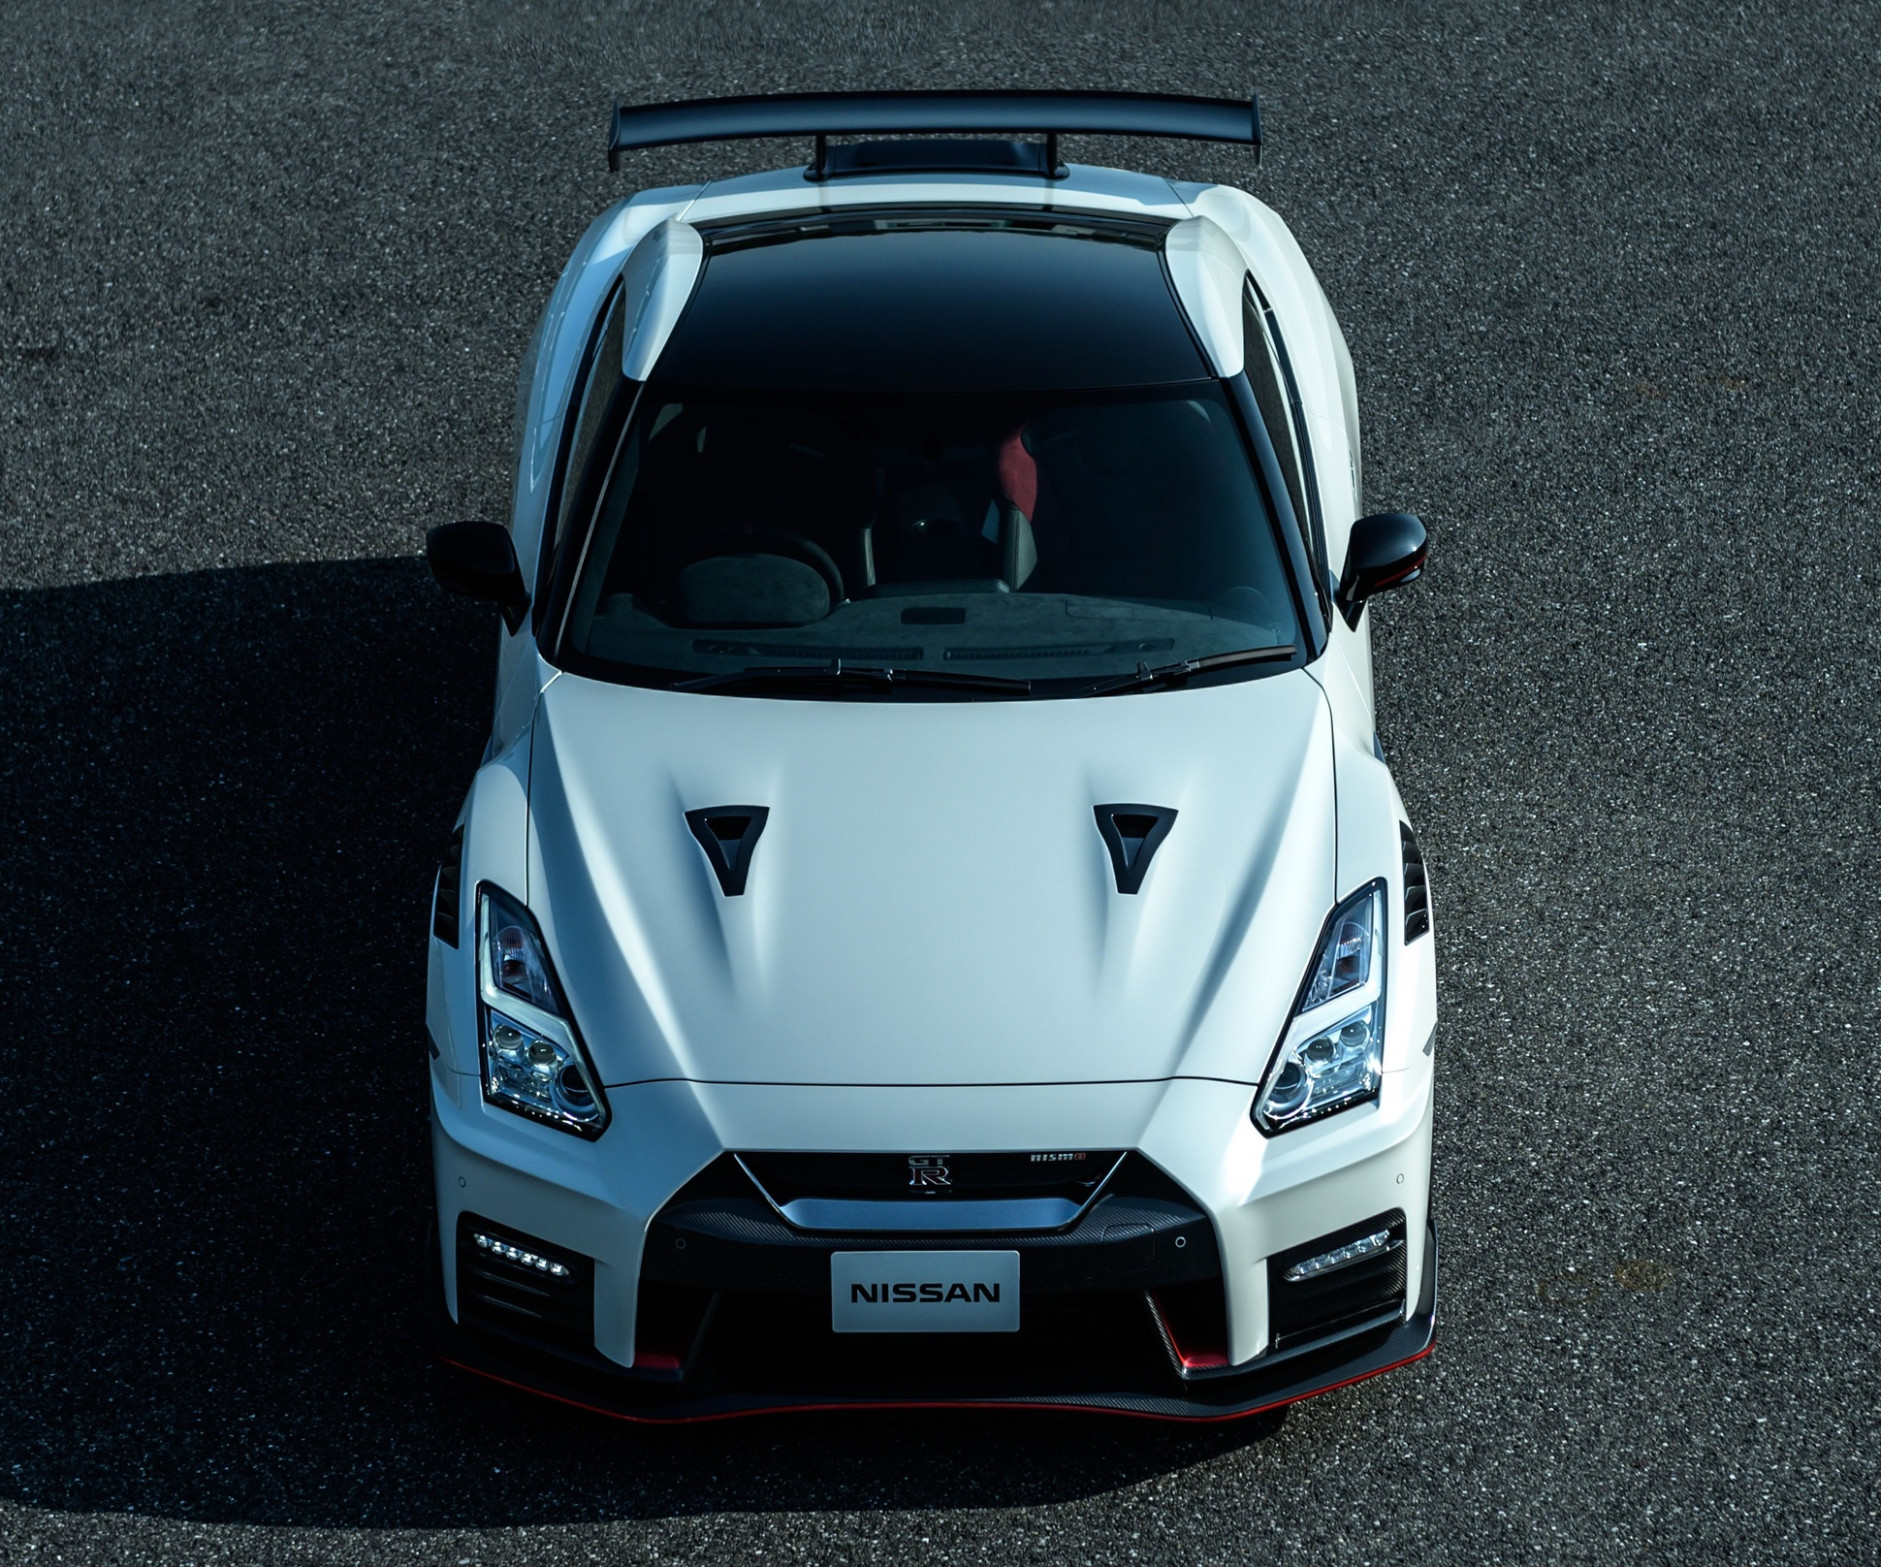 Release Date and Concept Nissan Gt-R 36 2022 Price